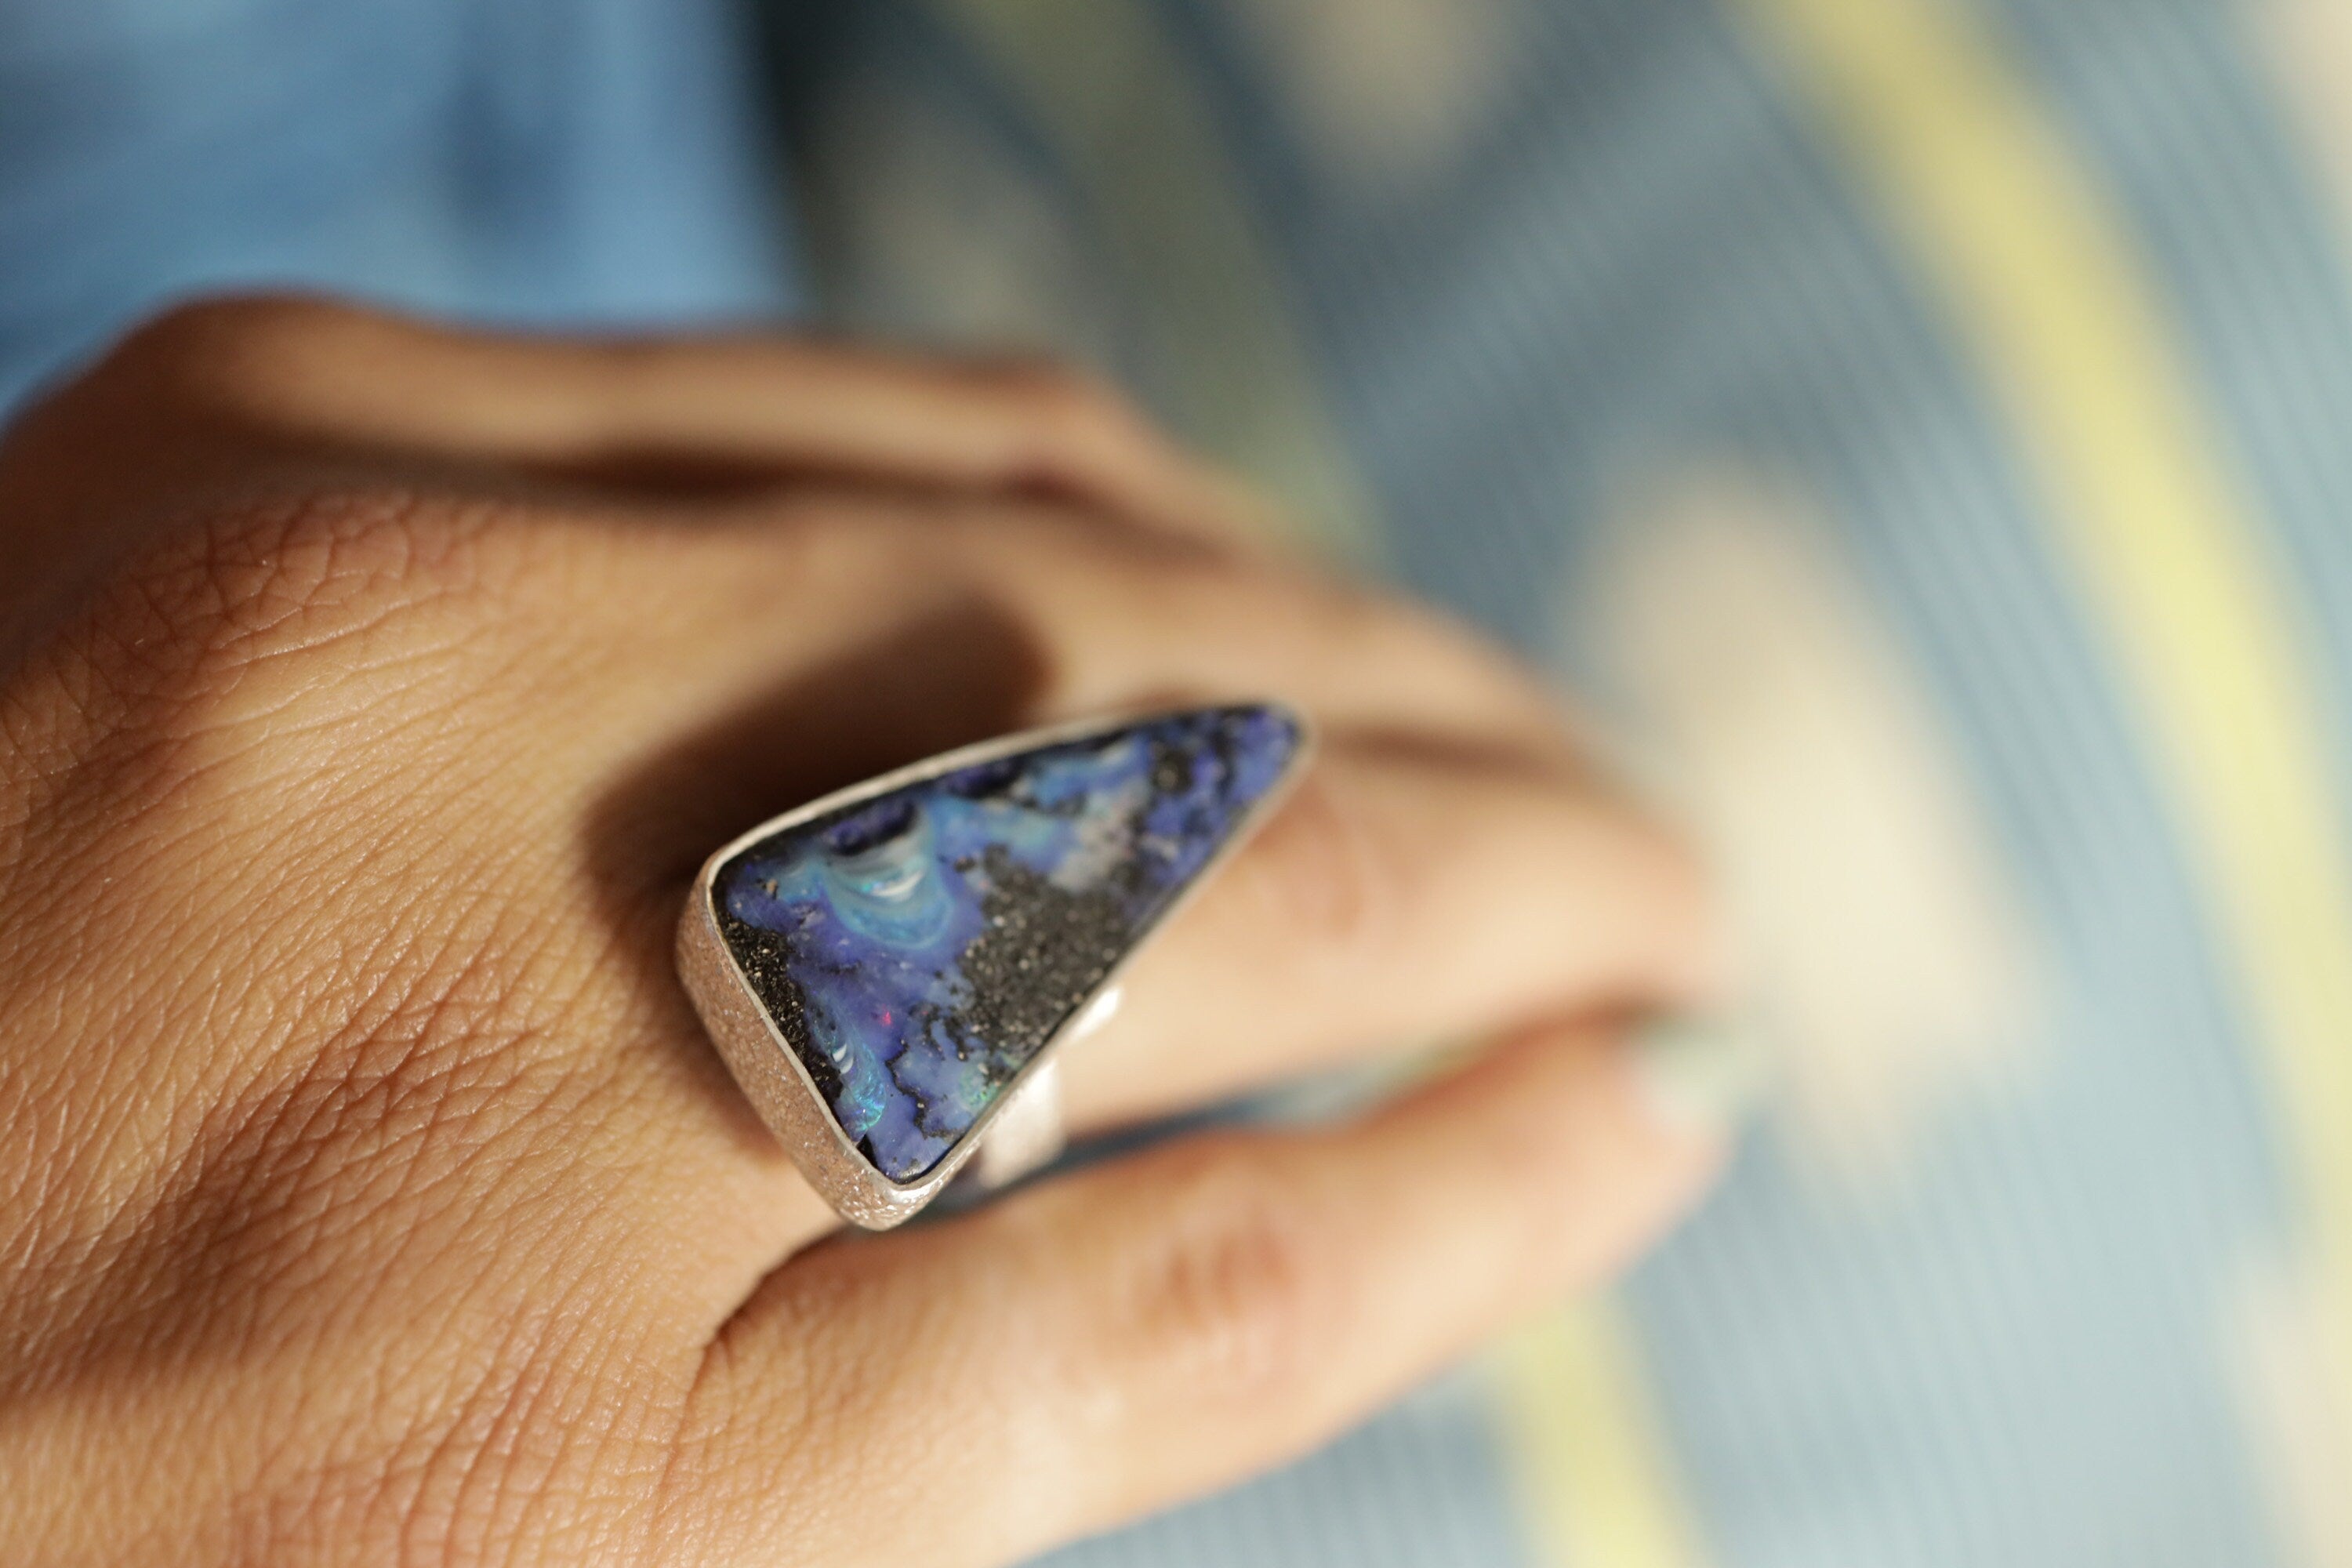 Triadic Opal Luminance : Adjustable Sterling Silver Ring with Triangular Opal - Textured - Unisex - Size 5-12 US